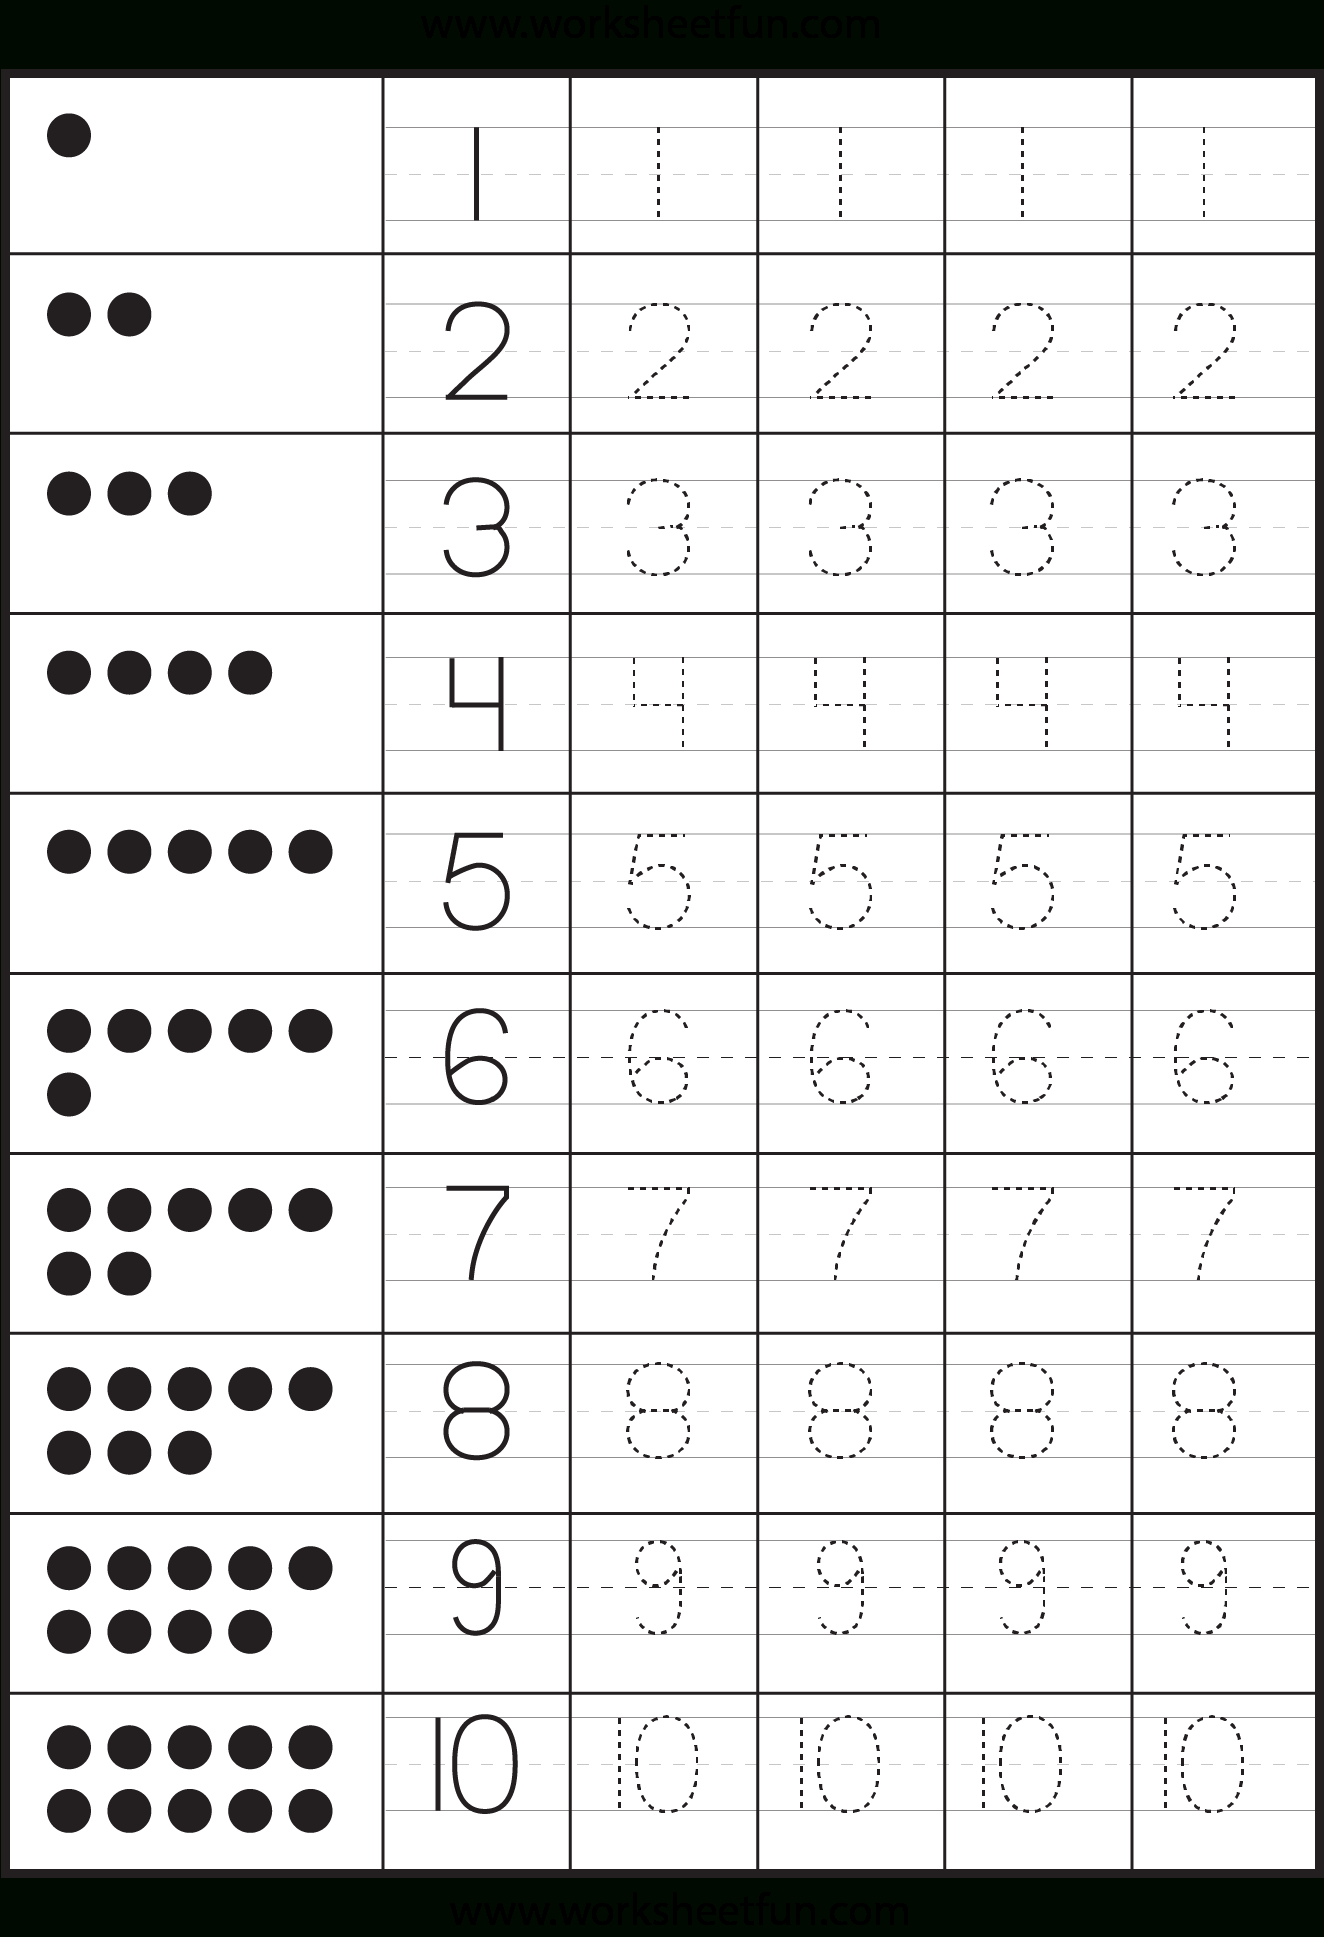 Tons Of Tracing, Number And Letter Practice | Preschool pertaining to Tracing Numbers And Letters Worksheets